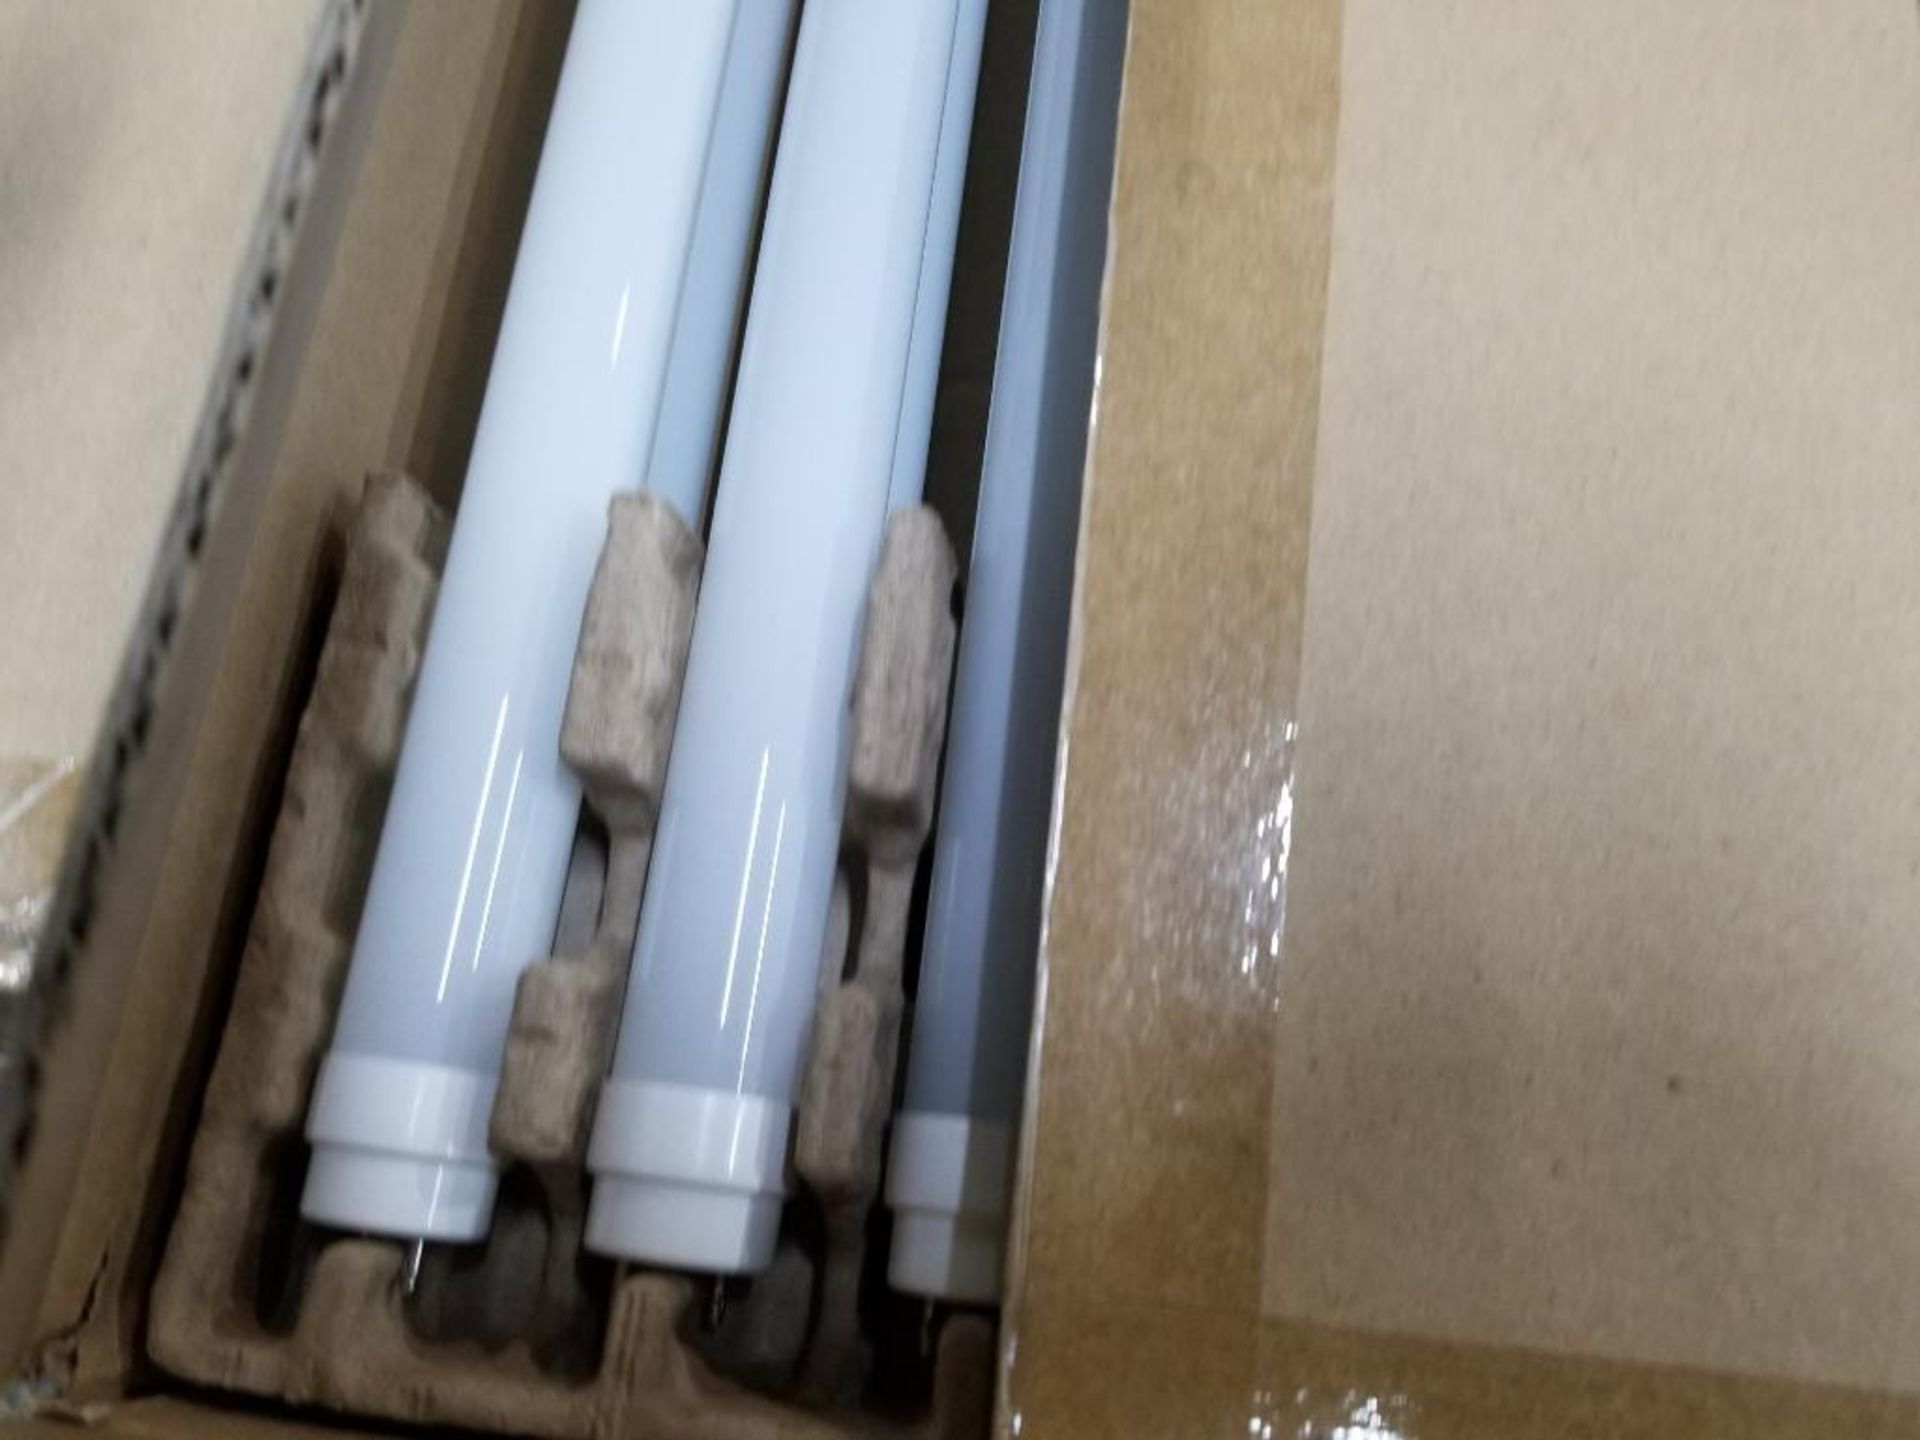 Qty 2 - Boxes of 10 each GE LED T8 replacement bulbs. - Image 3 of 4